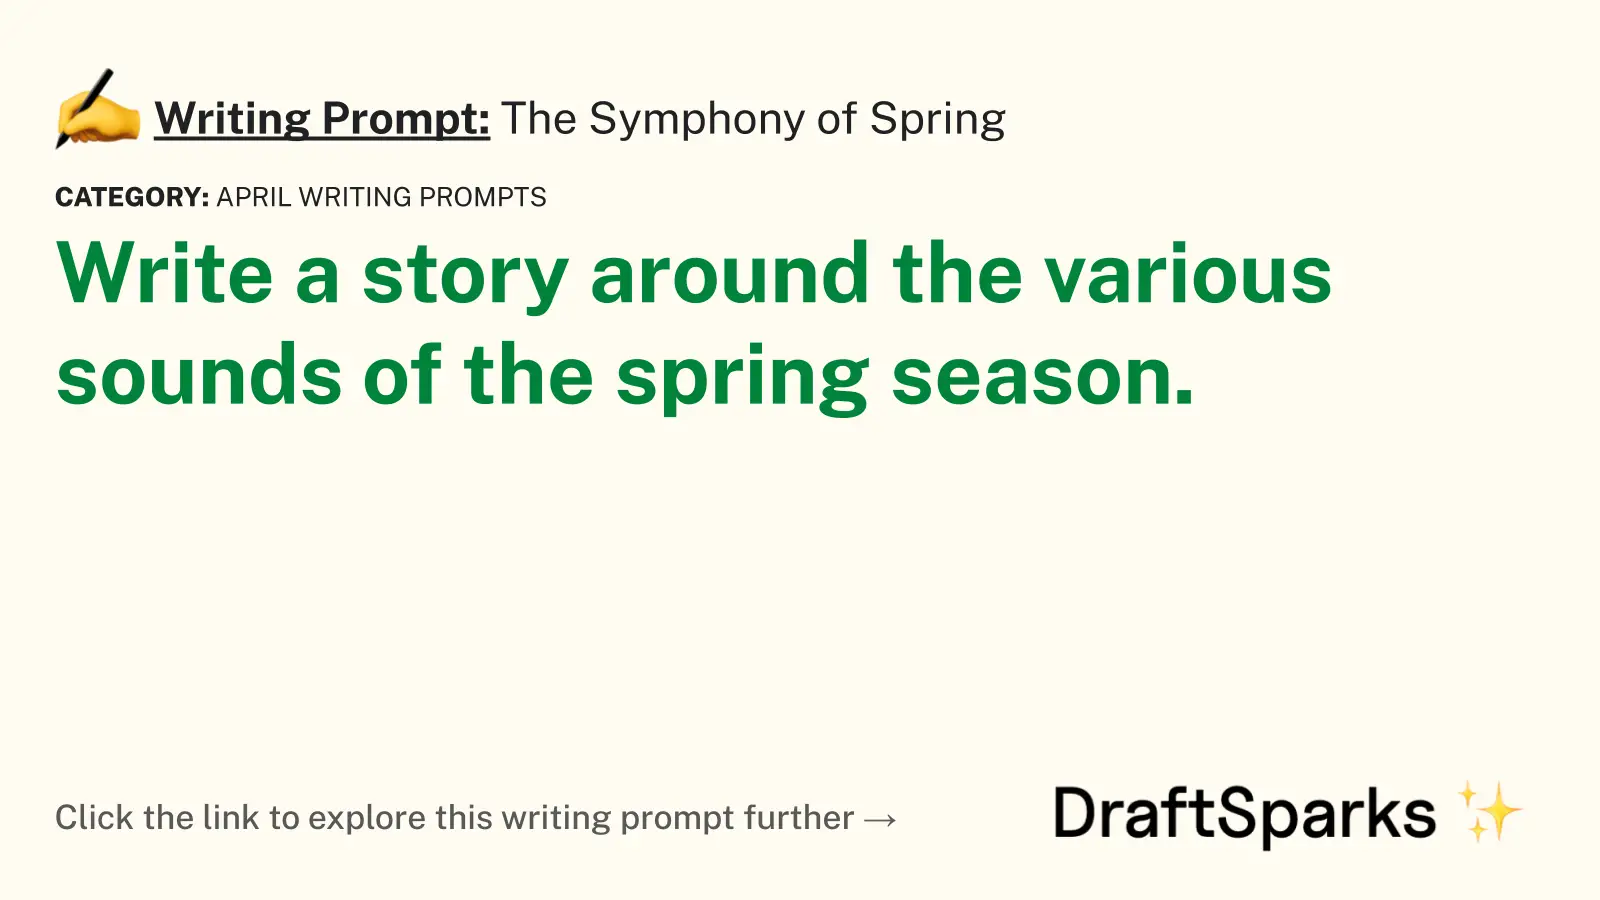 The Symphony of Spring